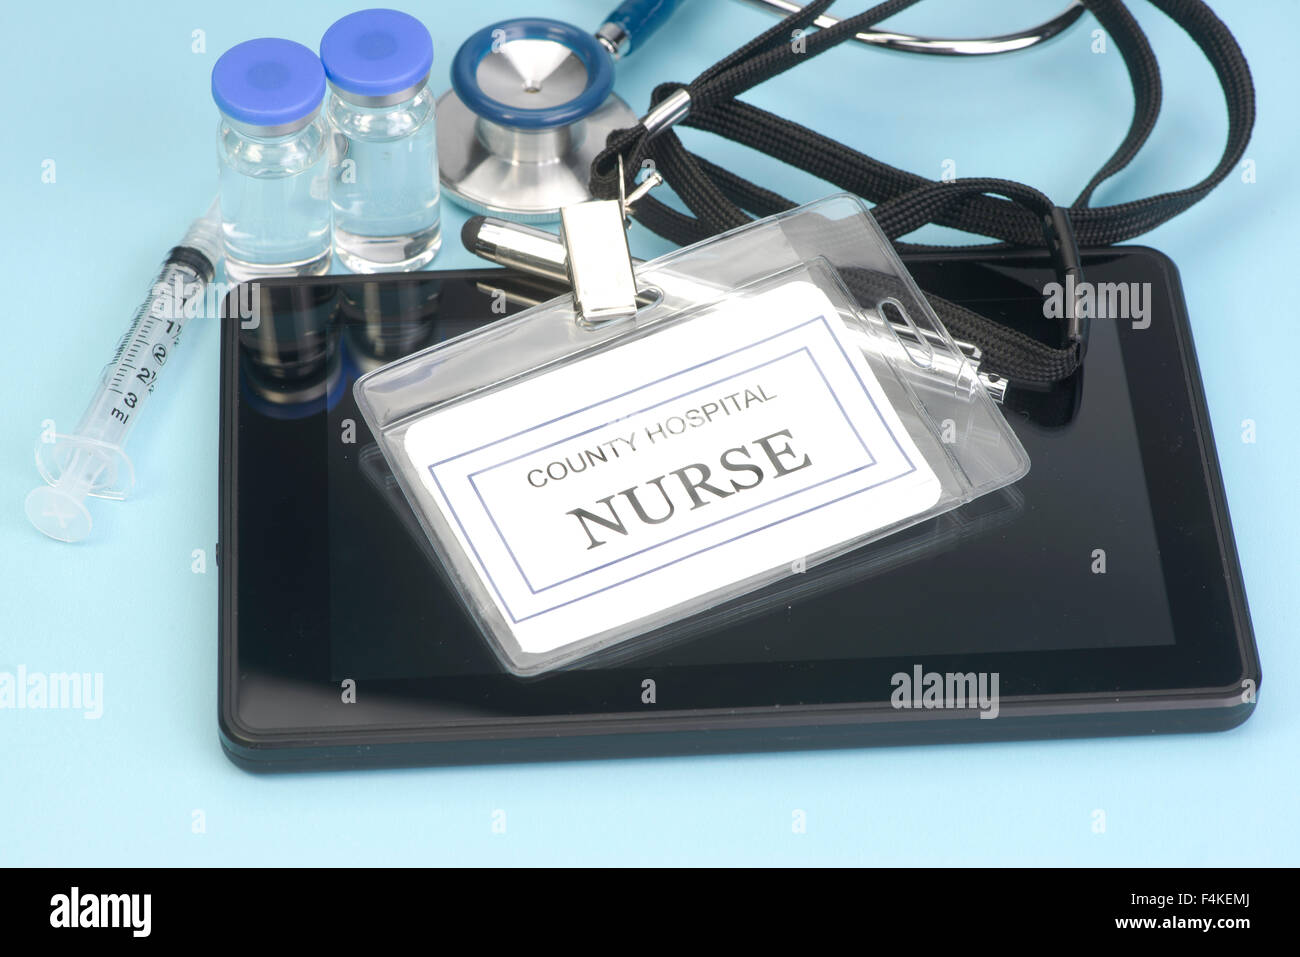 Fictitious nurse identification tag on personal computing device with stethoscope and vials. Stock Photo